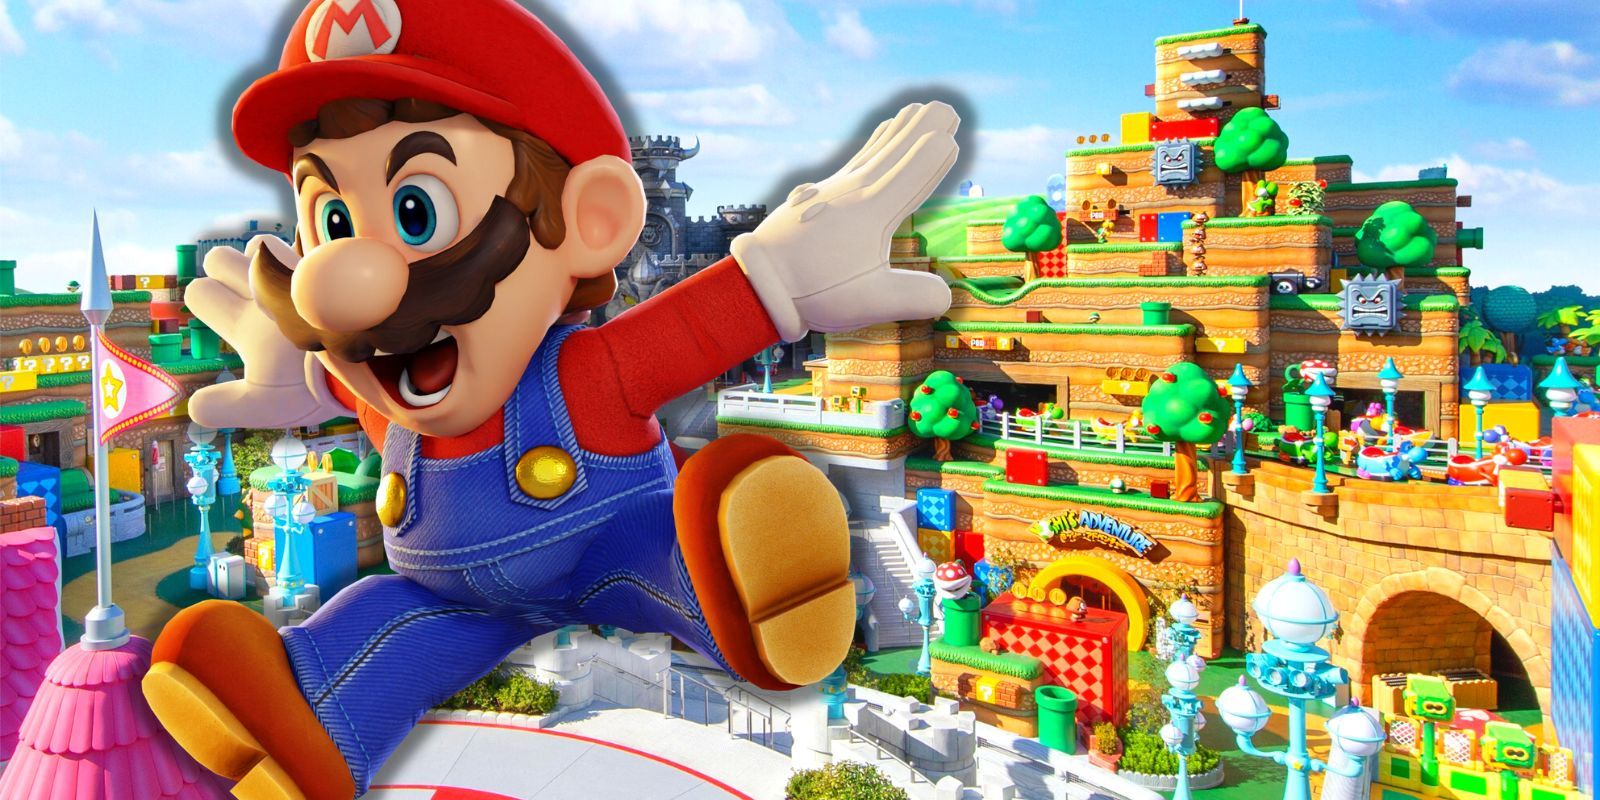 Mario leaping in excitement at Super Nintendo World